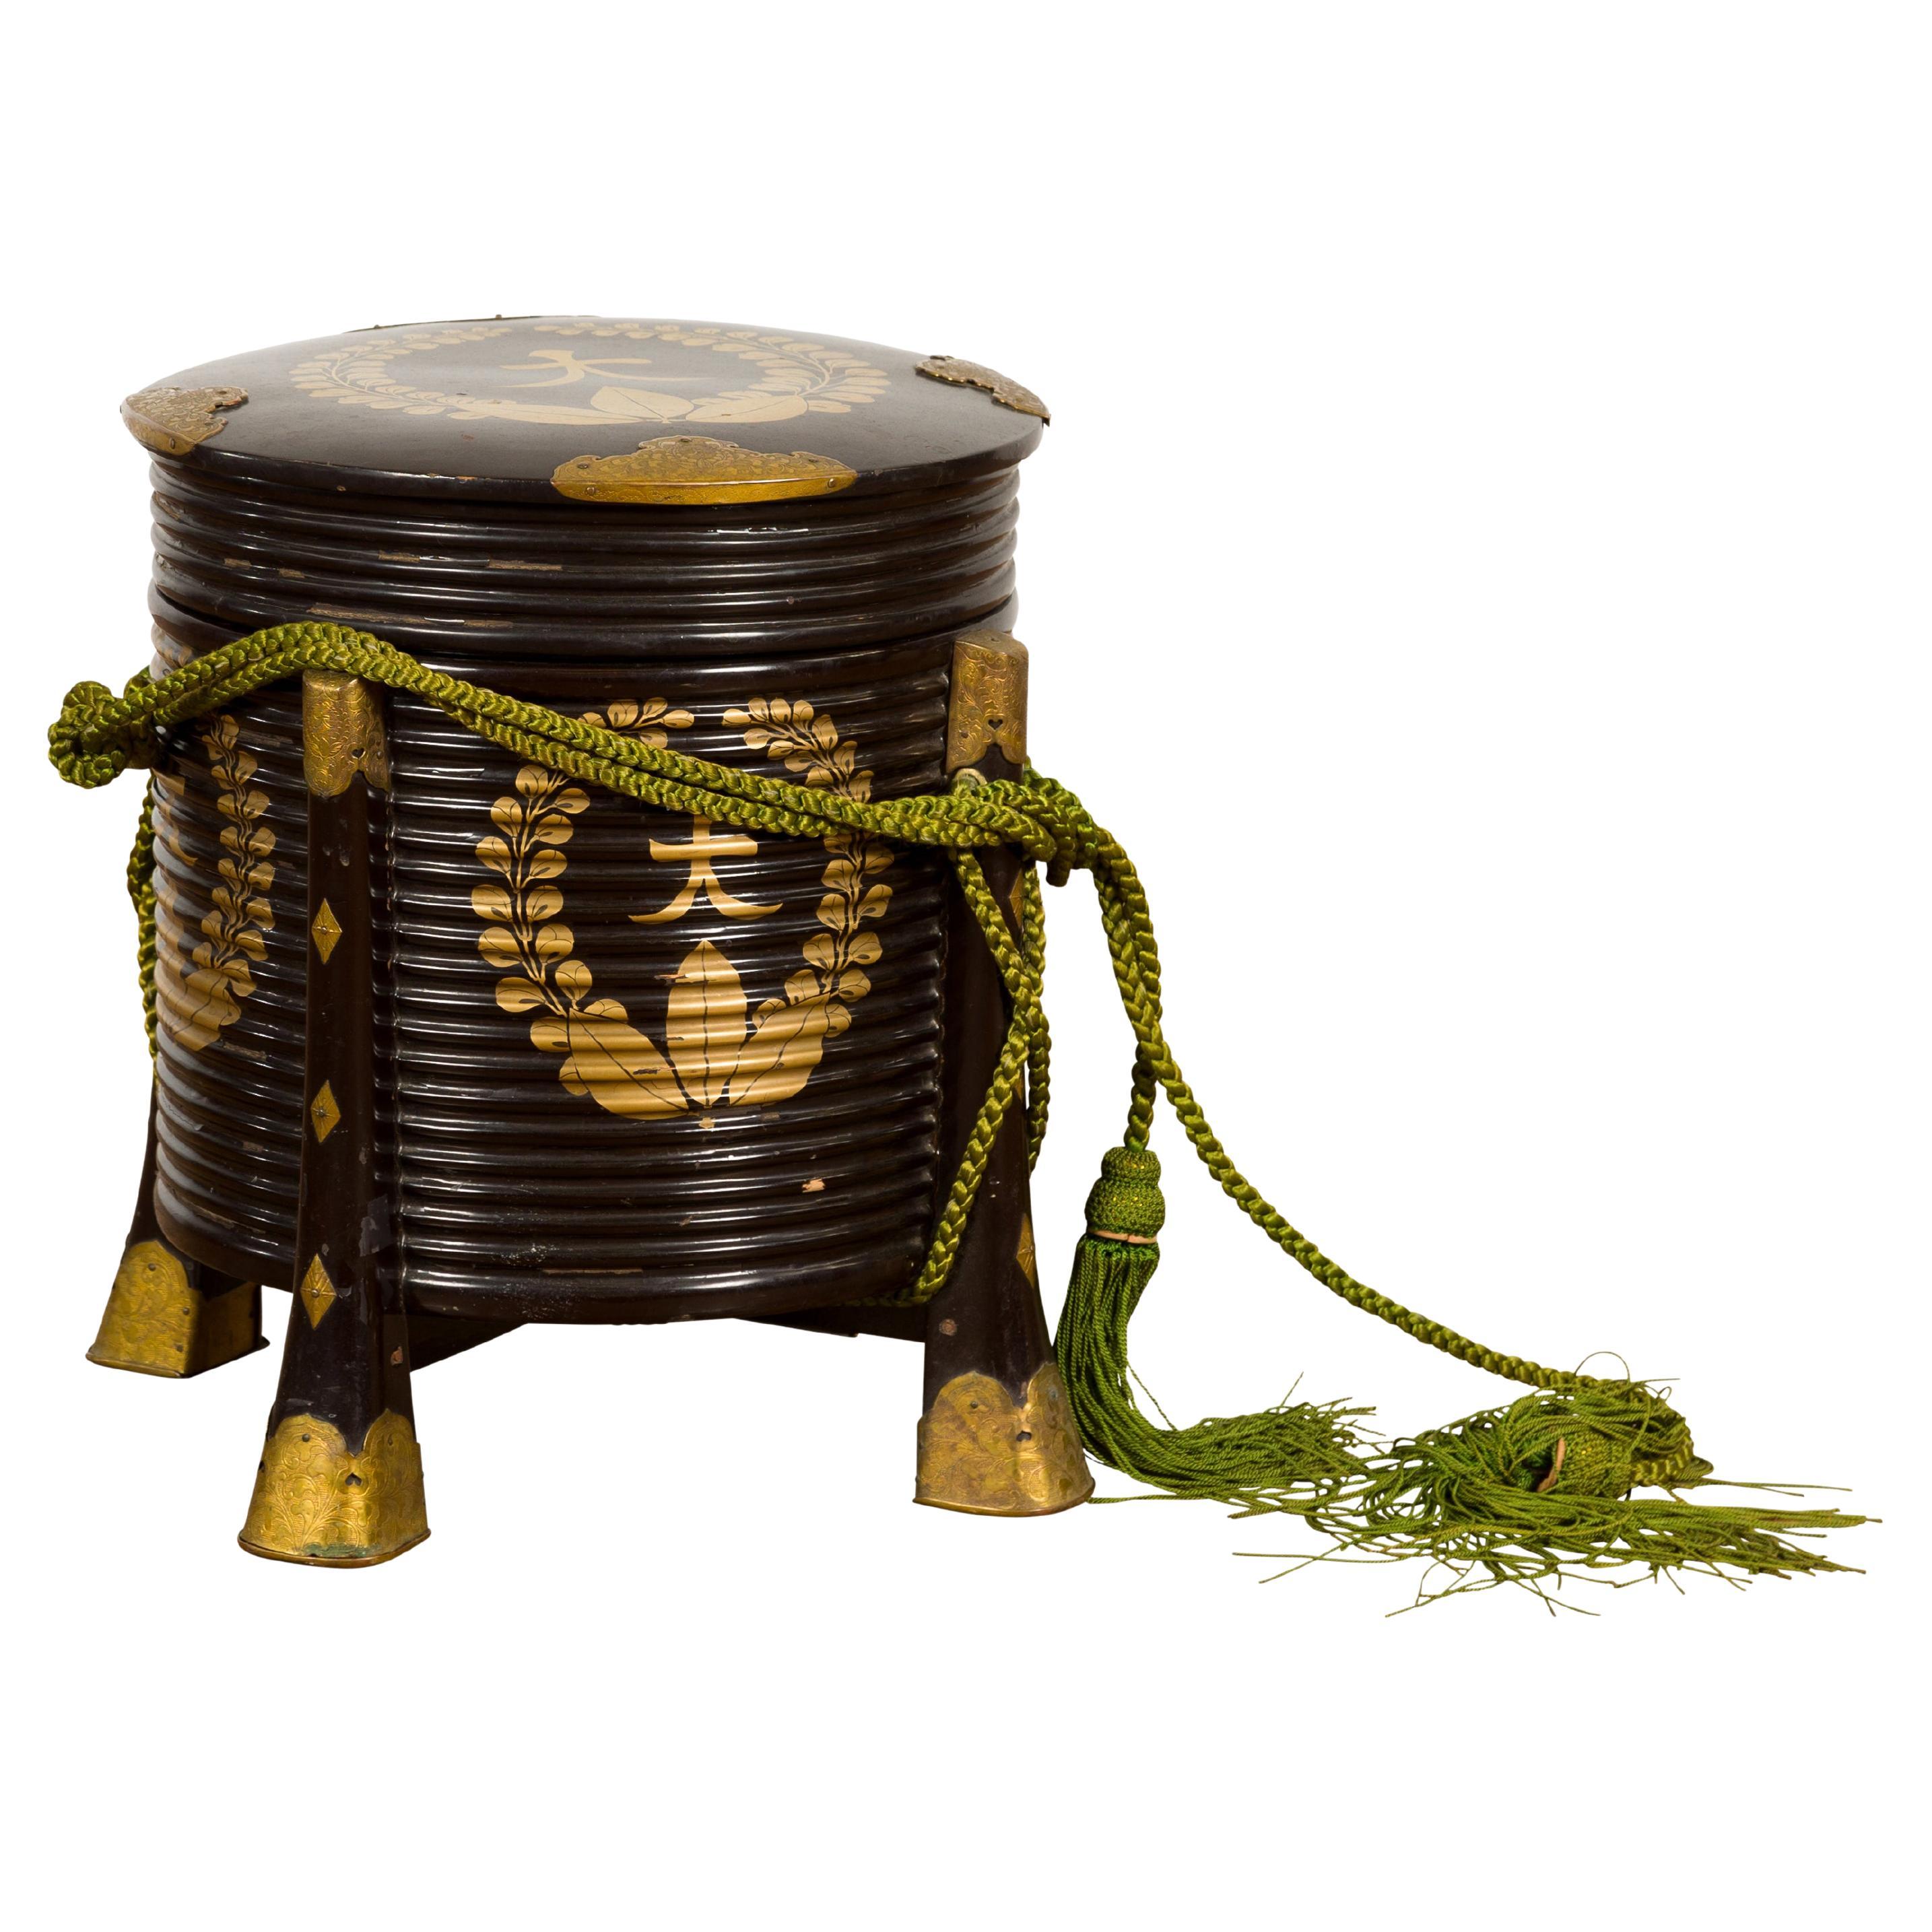 Japanese Meiji Period Hokai Lidded Box with Brass Accents and Original Rope For Sale